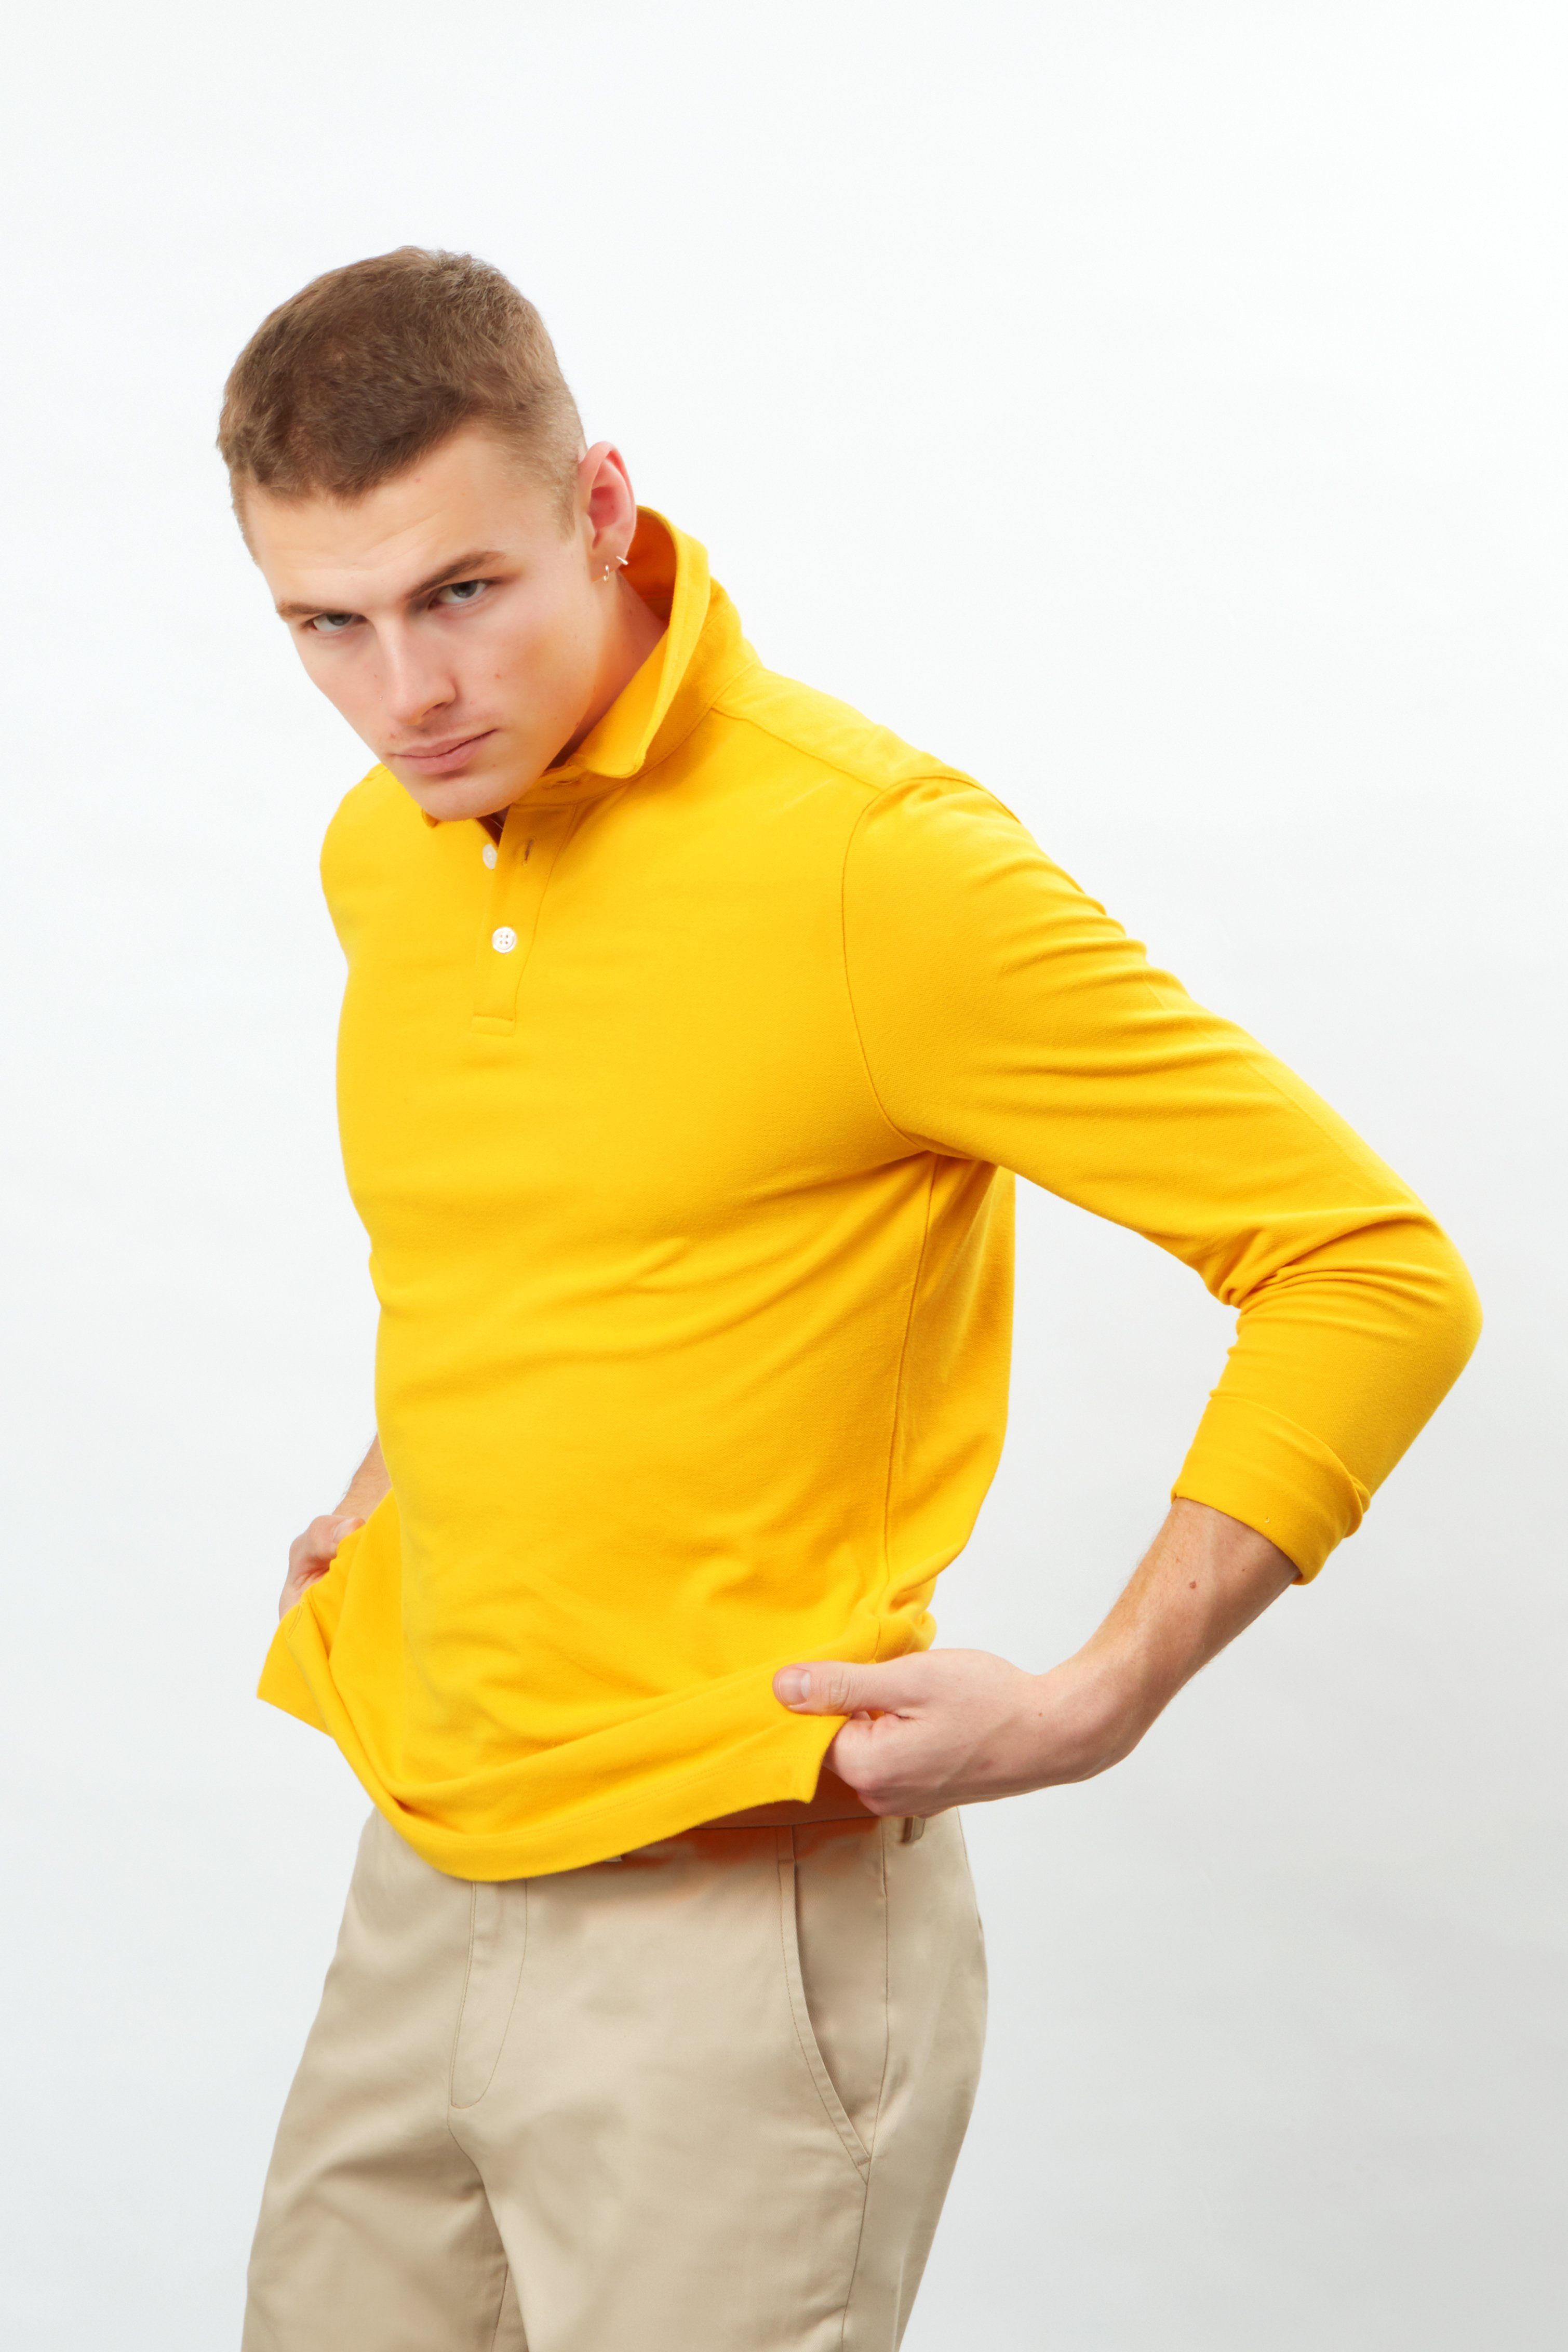 Long Sleeve 3 Button Pique Polo
RJL0004
Long sleeve polo shirt in Bodyfit cotton and Spandex pique. 
KEY: Stretch, Packable, Utility, Easy. 
DETAIL: Three buttons, yolk, side vents, locker loop. 
FABRICATION: 95% cotton 5% Spandex Bodyfit. 
 